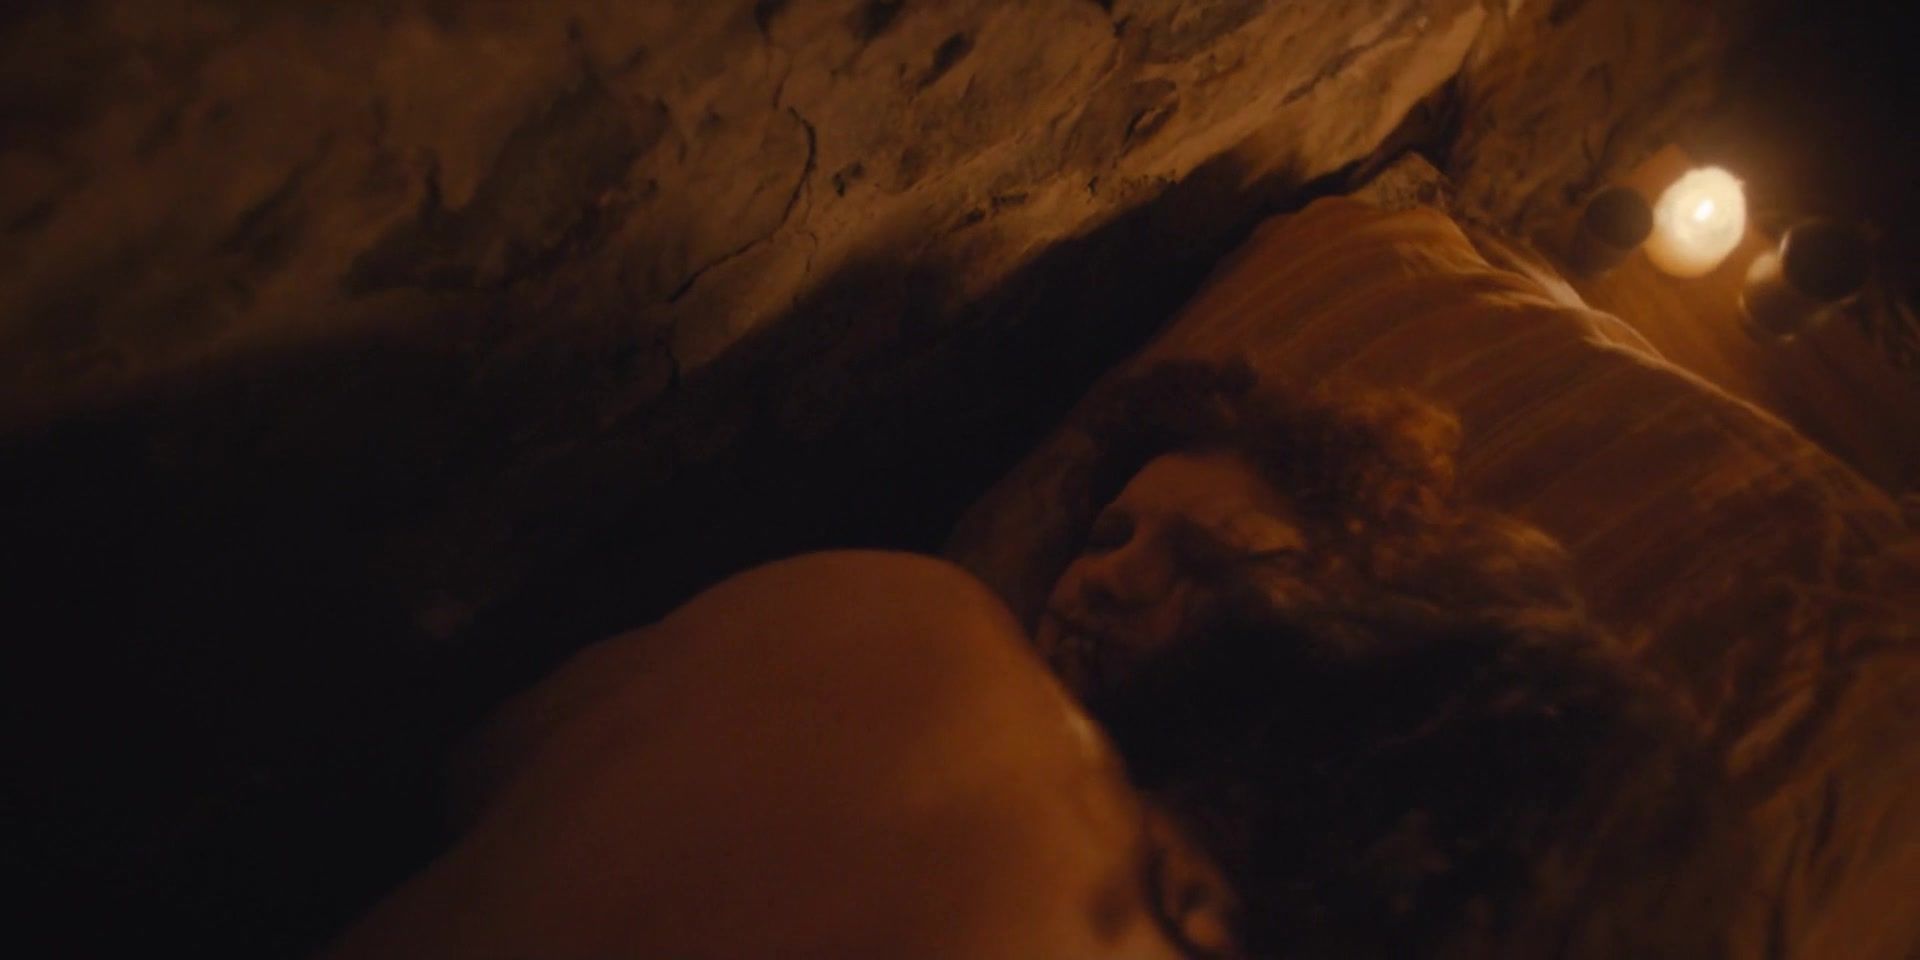 Huge Nude Anne-Laure Vandeputte, Charlotte Timmers - Thieves of the Wood s01e01e05 (2020) Motel